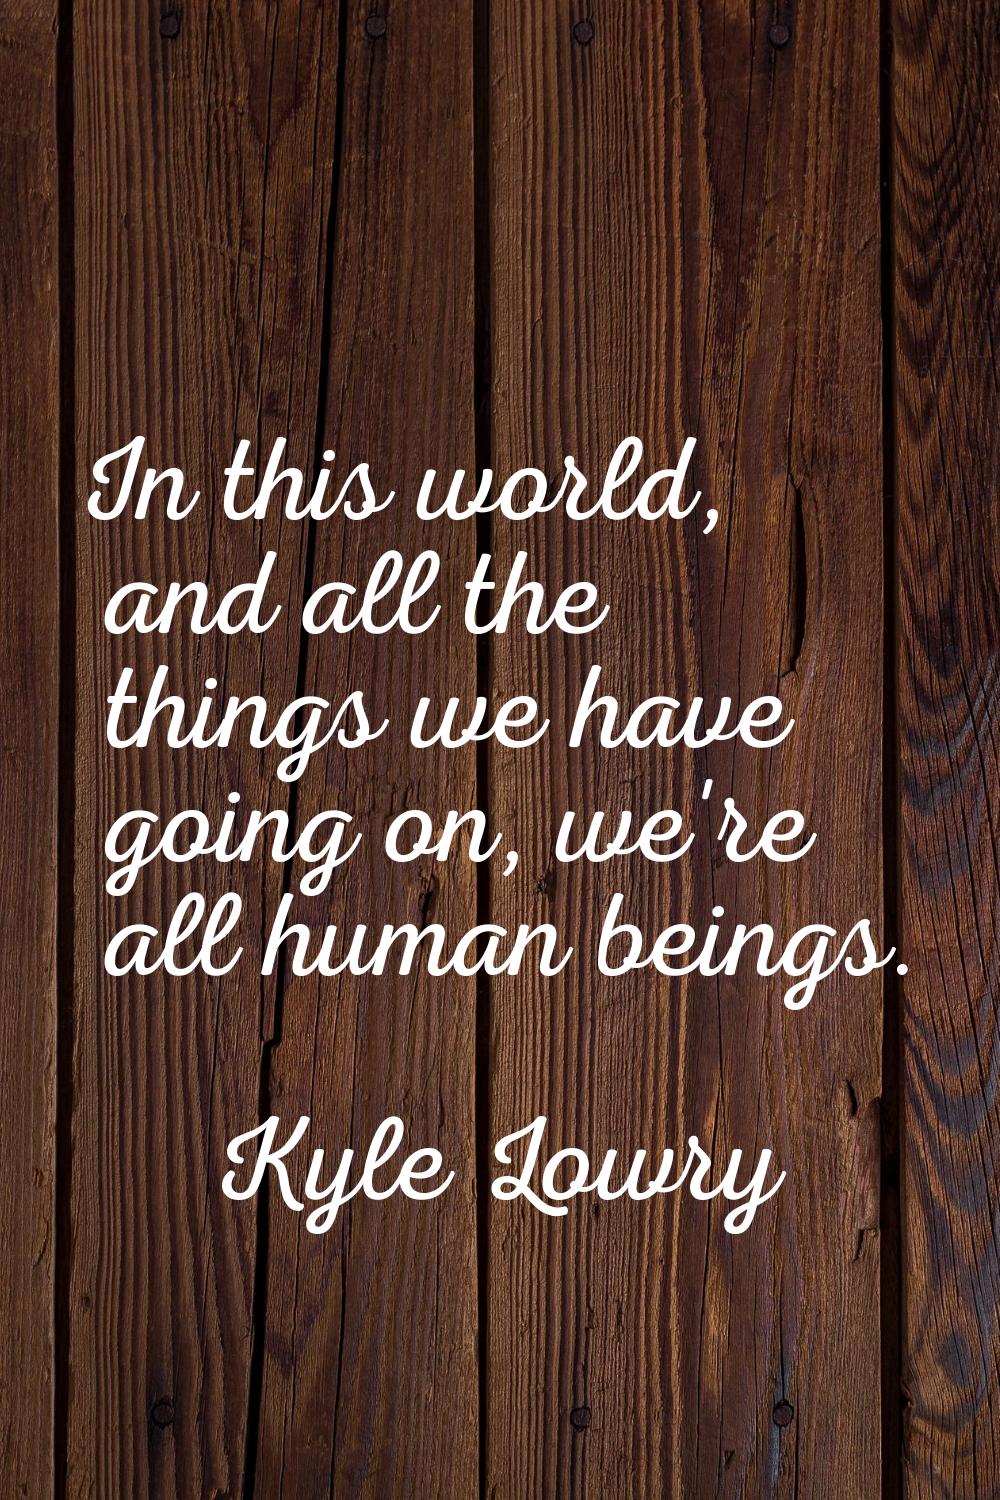 In this world, and all the things we have going on, we're all human beings.